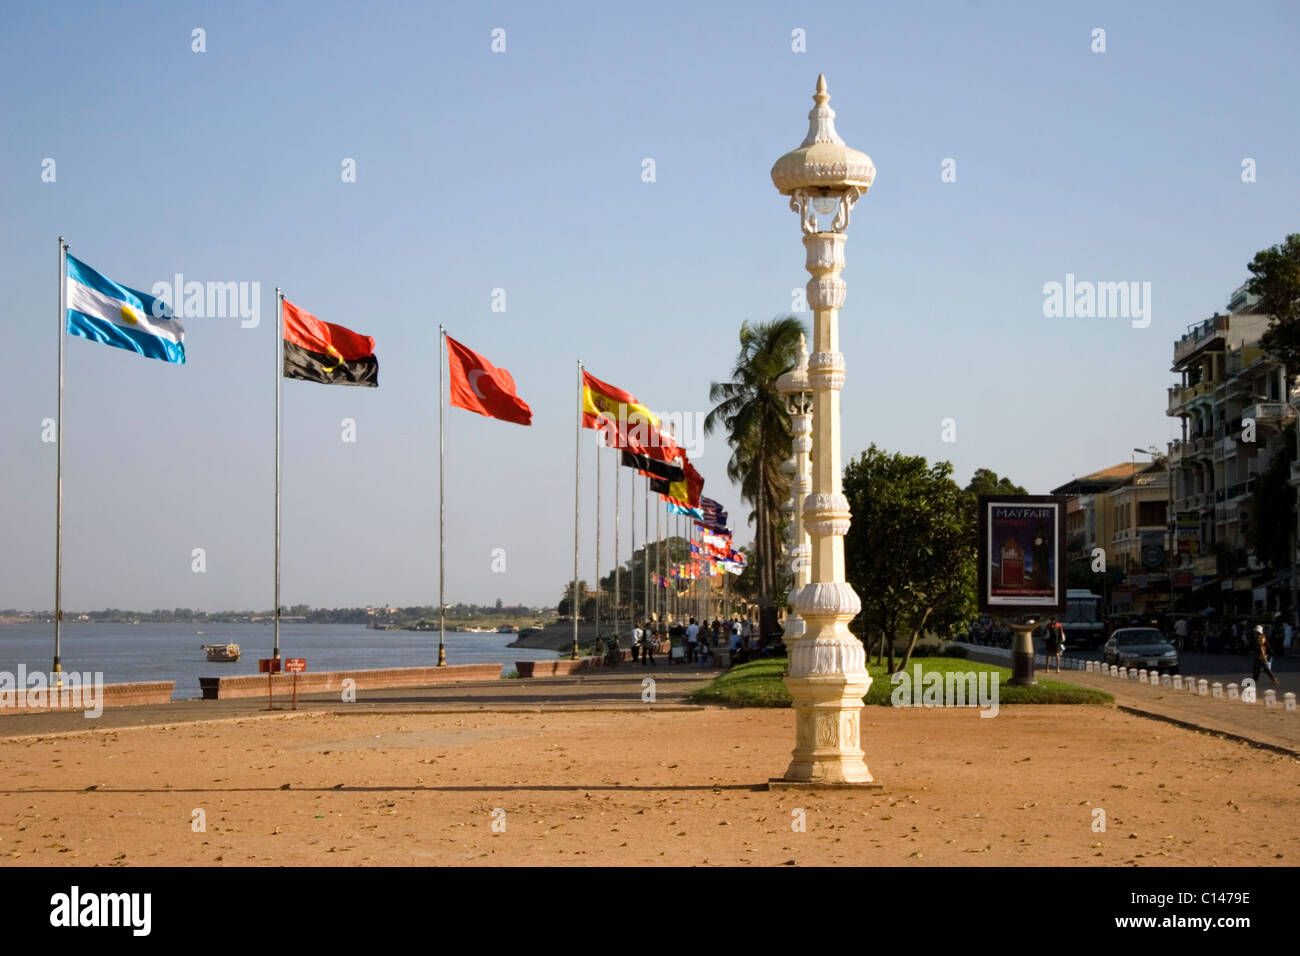 A group of international flags are flying in the wind on the riverside promenade near the Mekong River in Phnom Penh, Cambodia. Stock Photo